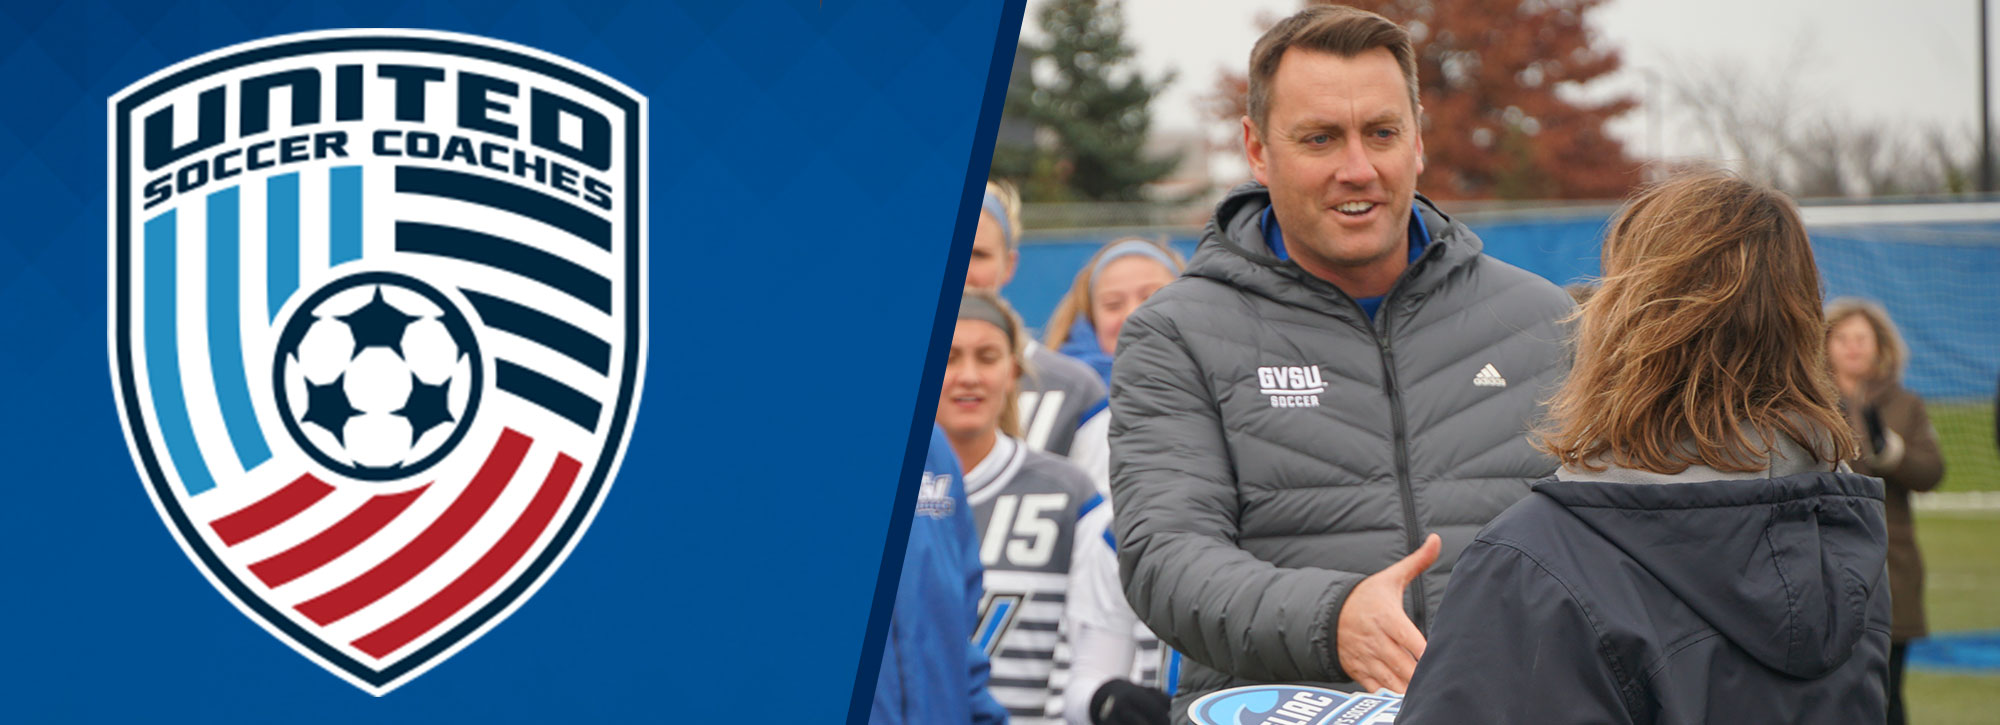 GVSU Staff Named United Soccer Coaches National Staff of the Year